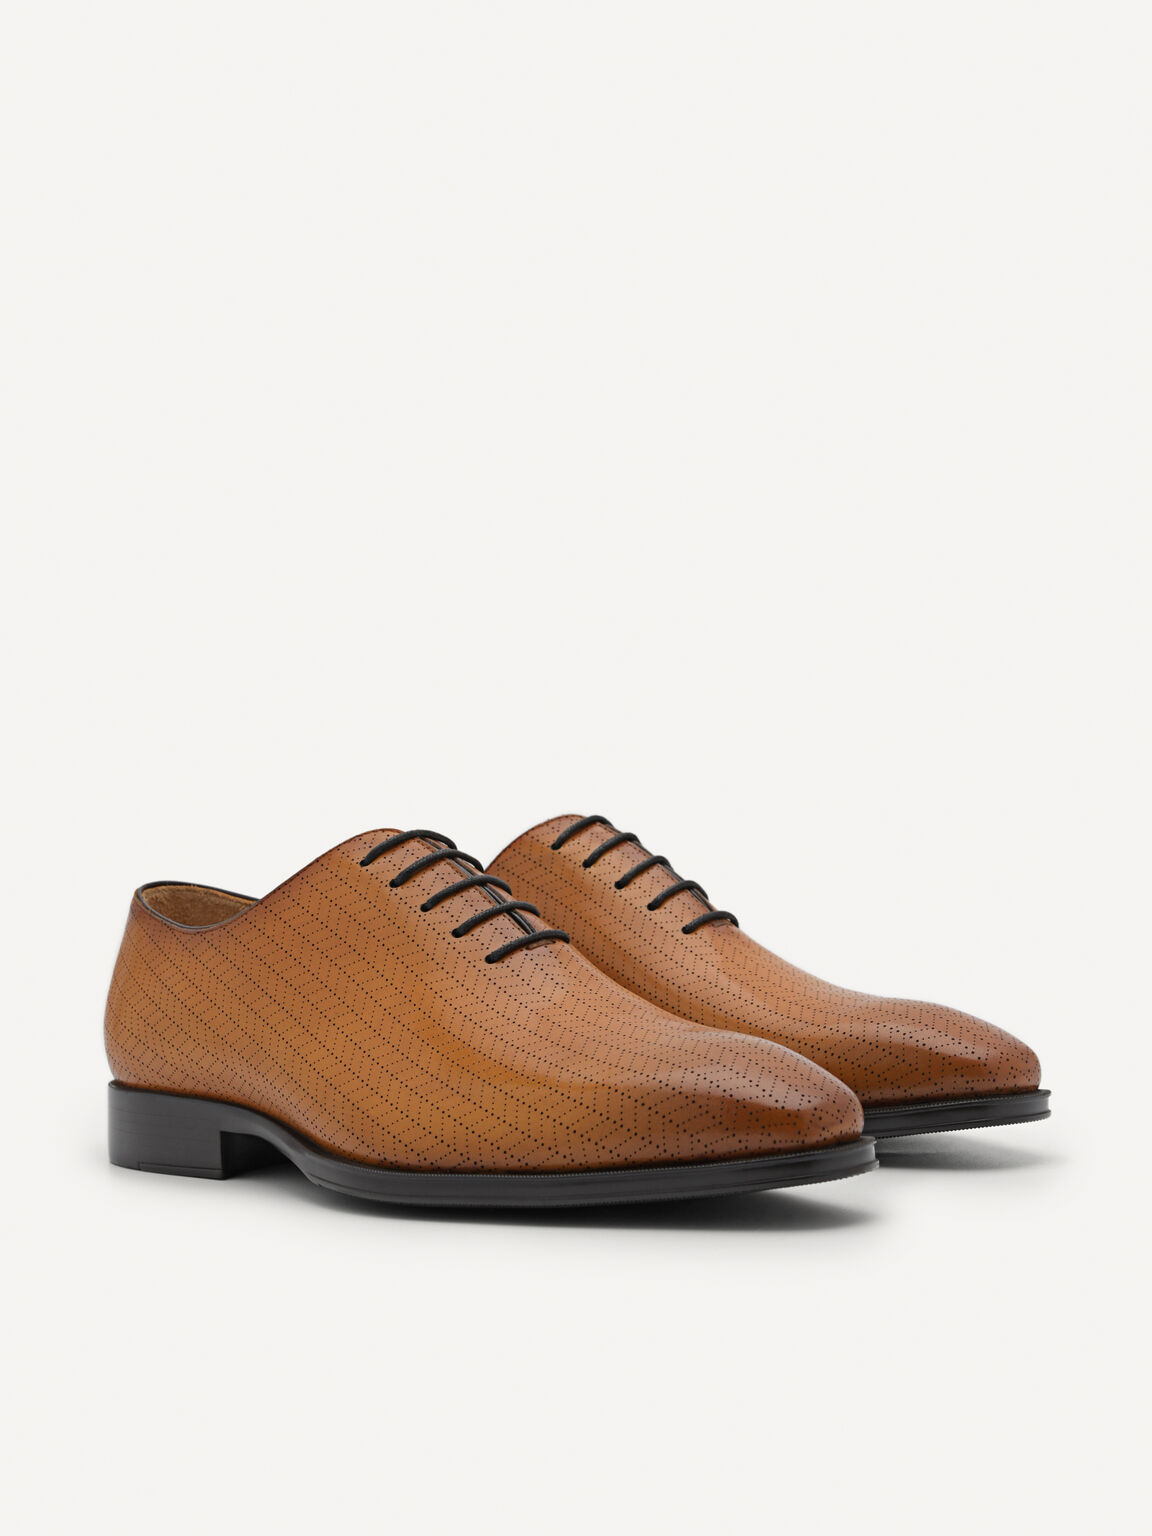 Leather Oxford Shoes, Camel